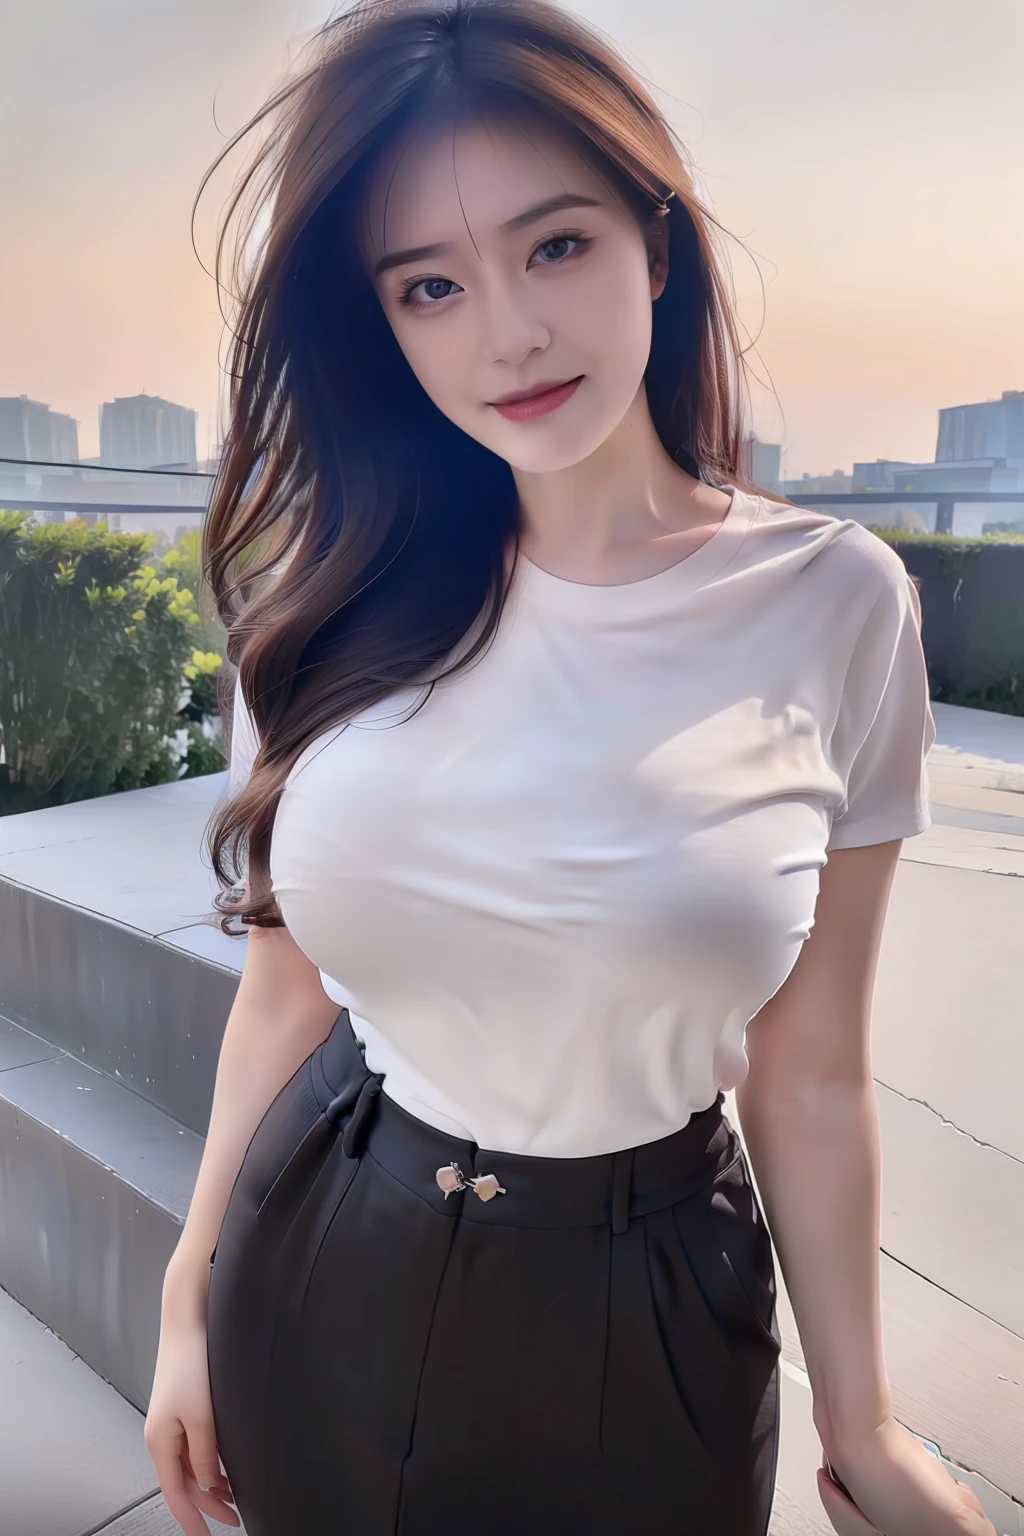 ((Midnight, Best quality, 8k, Masterpiece :1.3)), Whole body, Long legs, Sharp focus :1.2, A pretty woman with perfect figure :1.4, Slender abs :1.1, ((Dark brown hair,Gigantic breasts :1.2)), (White tight tshirt, Jean bib, Standing:1.2), ((Night city view, Rooftop:1.3)), Highly detailed face and skin texture, Detailed eyes, Double eyelid